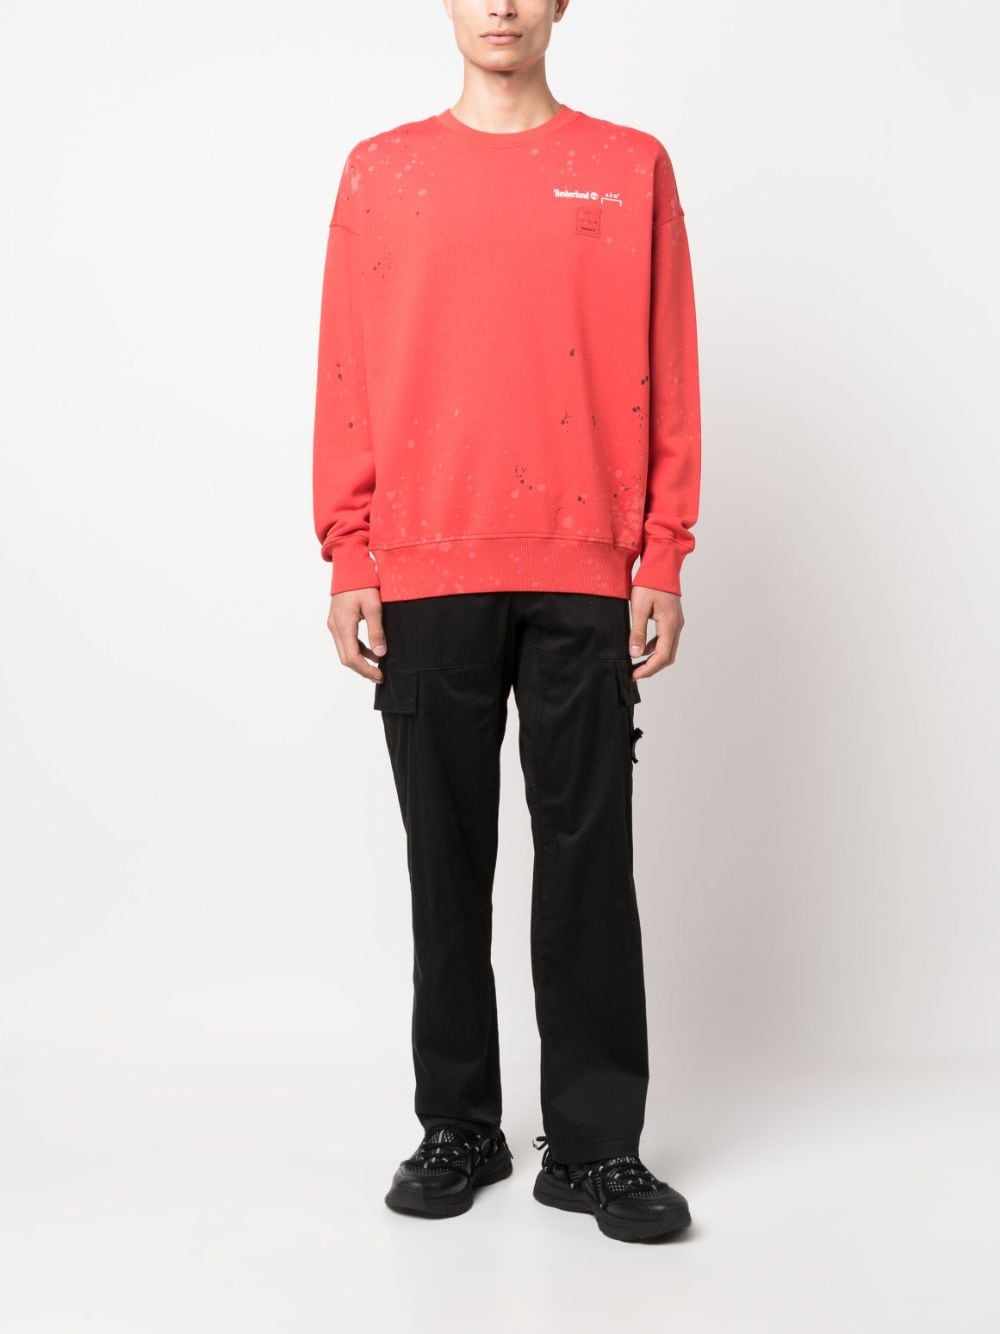 A-COLD-WALL* x Timberland crew-neck sweatshirt - Rood